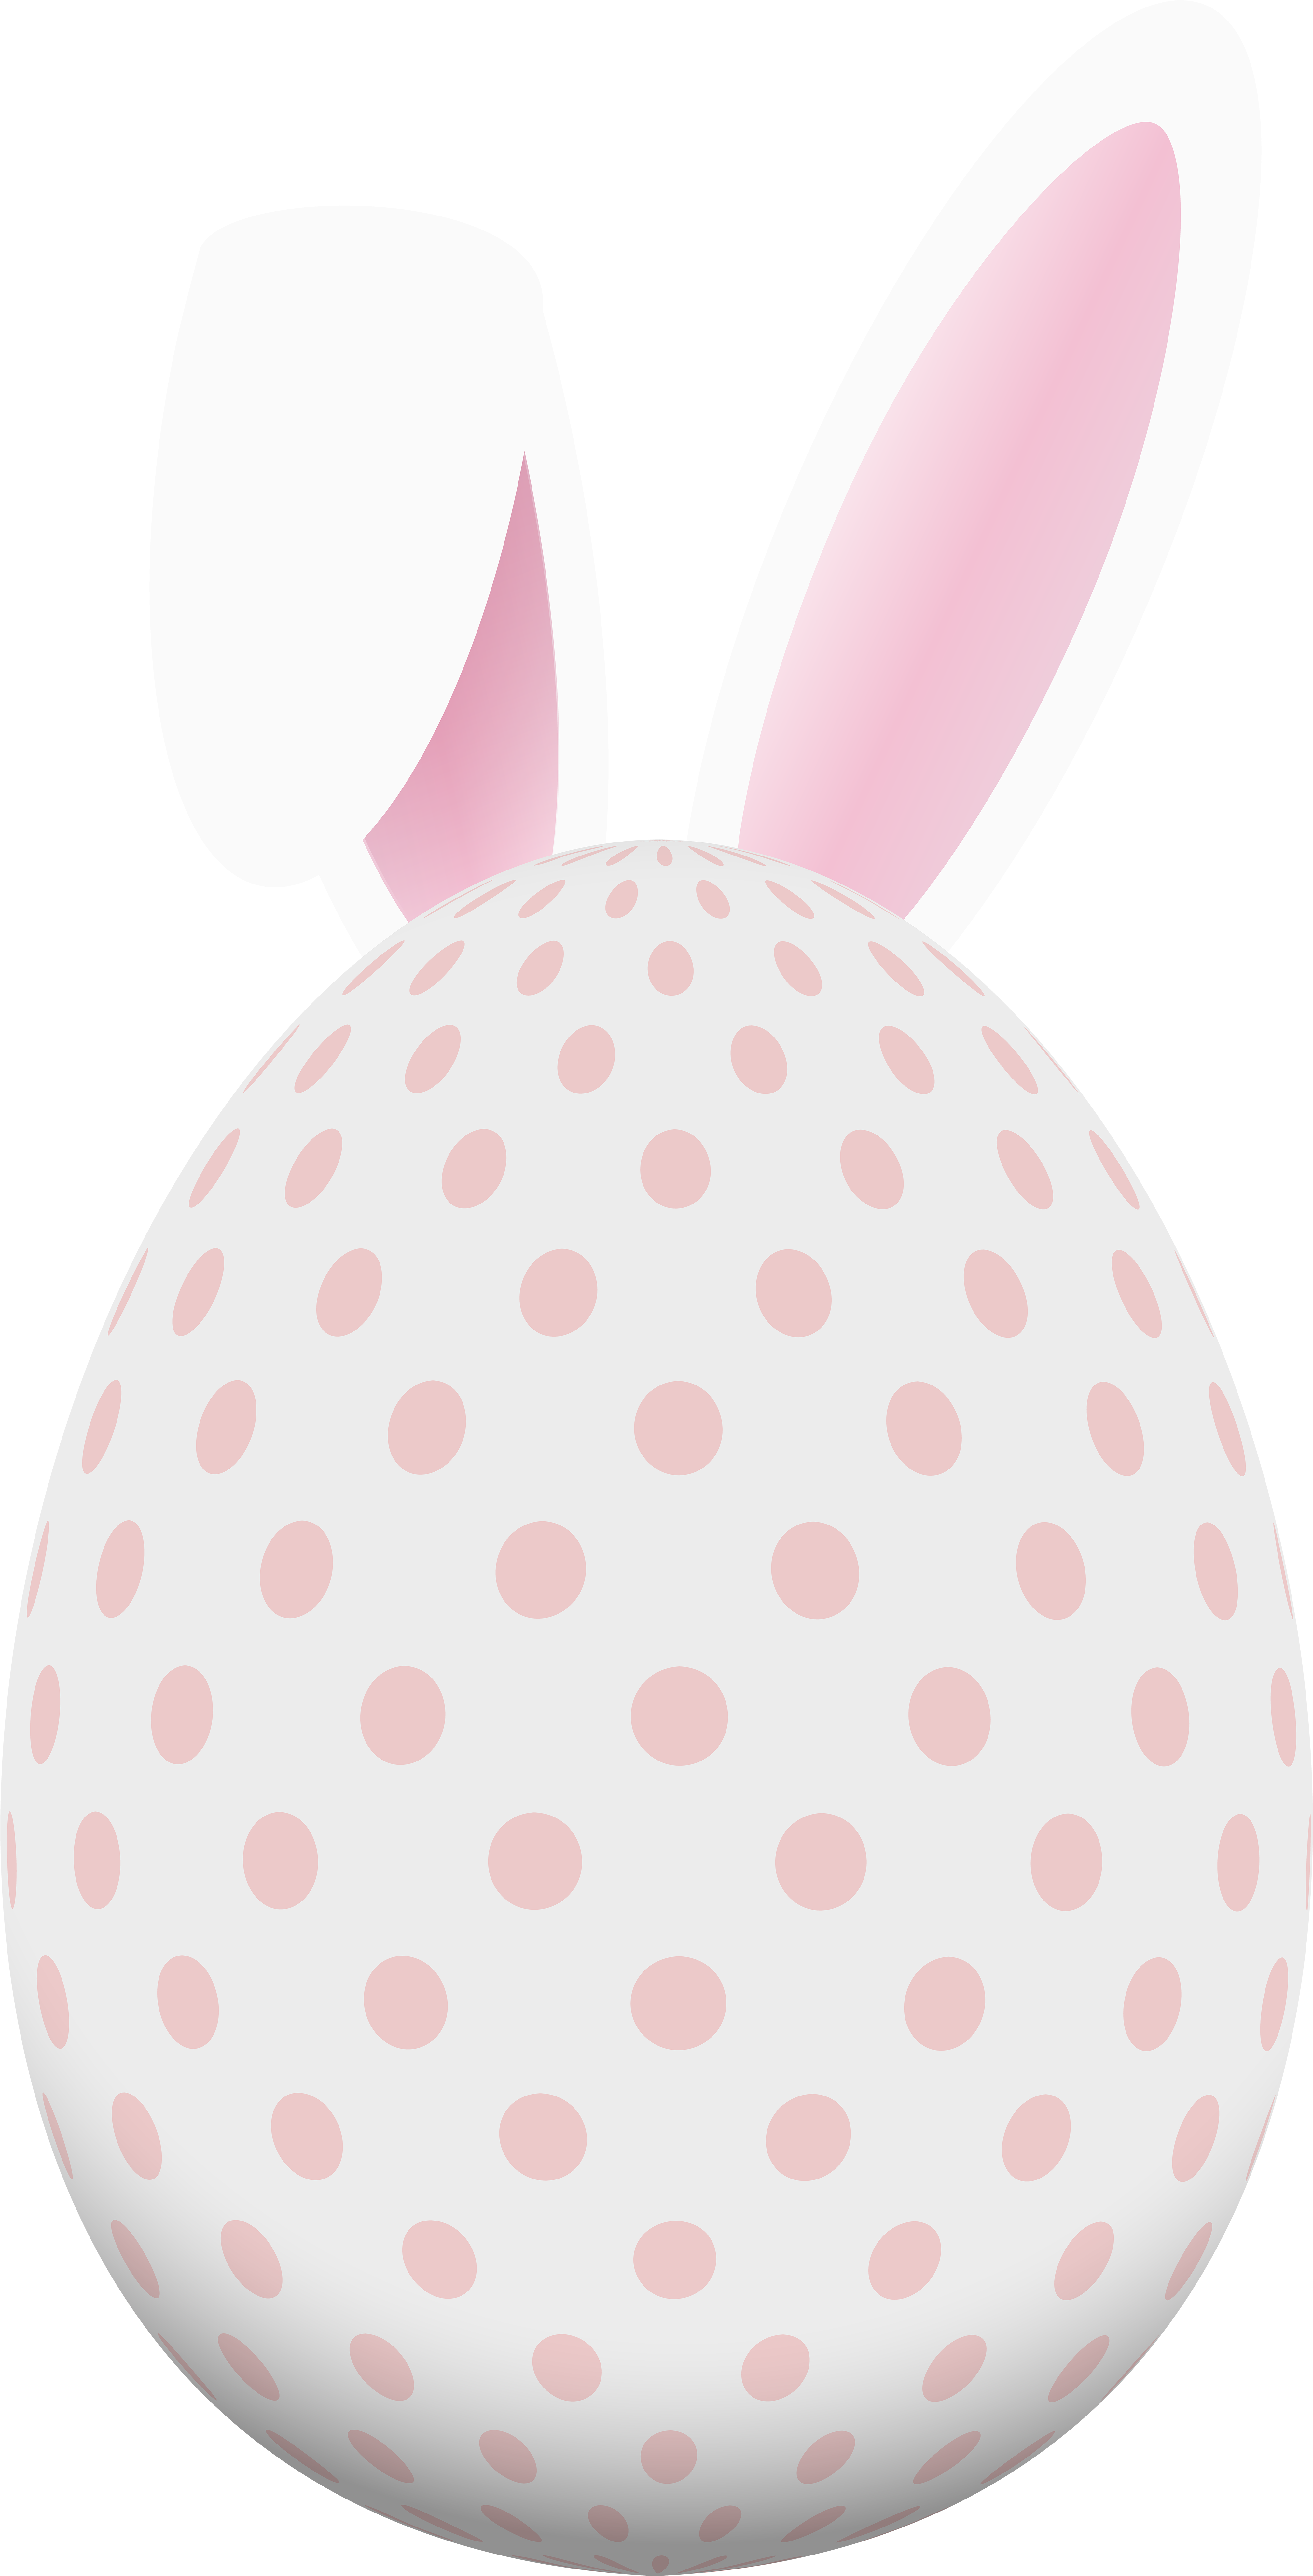 Bunny Png Egg With Clip Royalty Free - Bunny Png Egg With Clip Royalty Free (4034x7913)